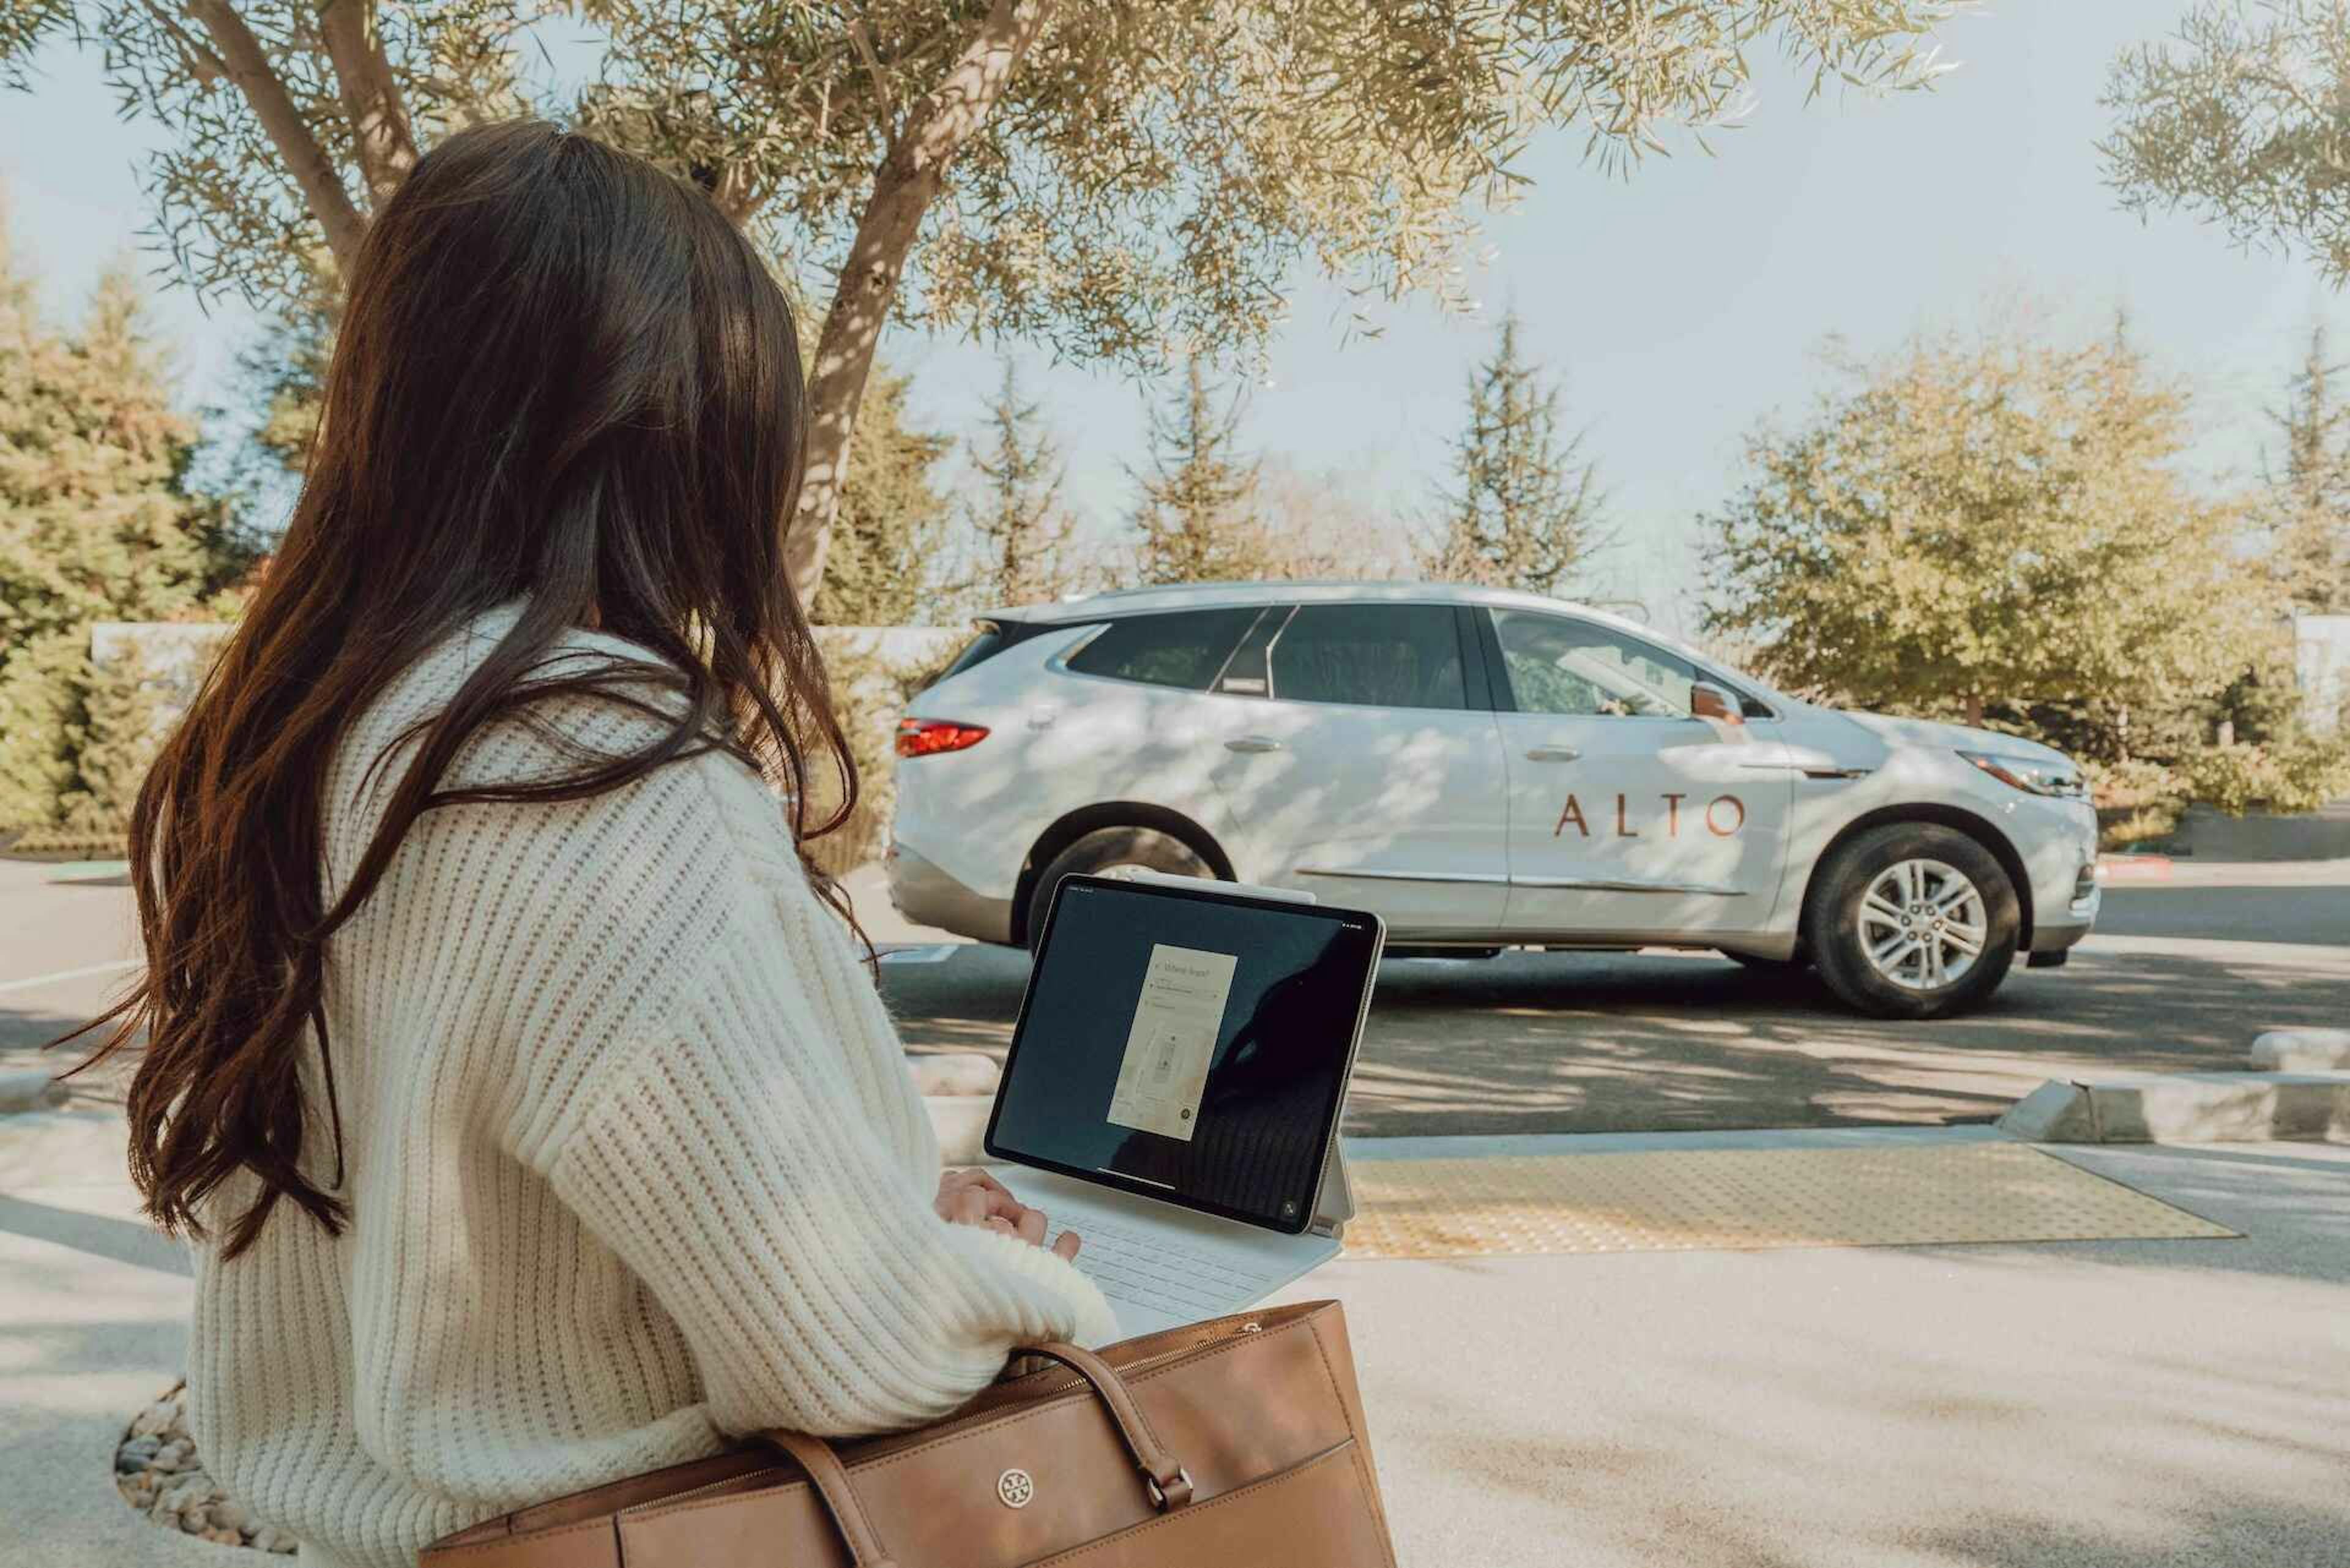 Alto rideshare car sits in the street while woman books a car ride on her computer